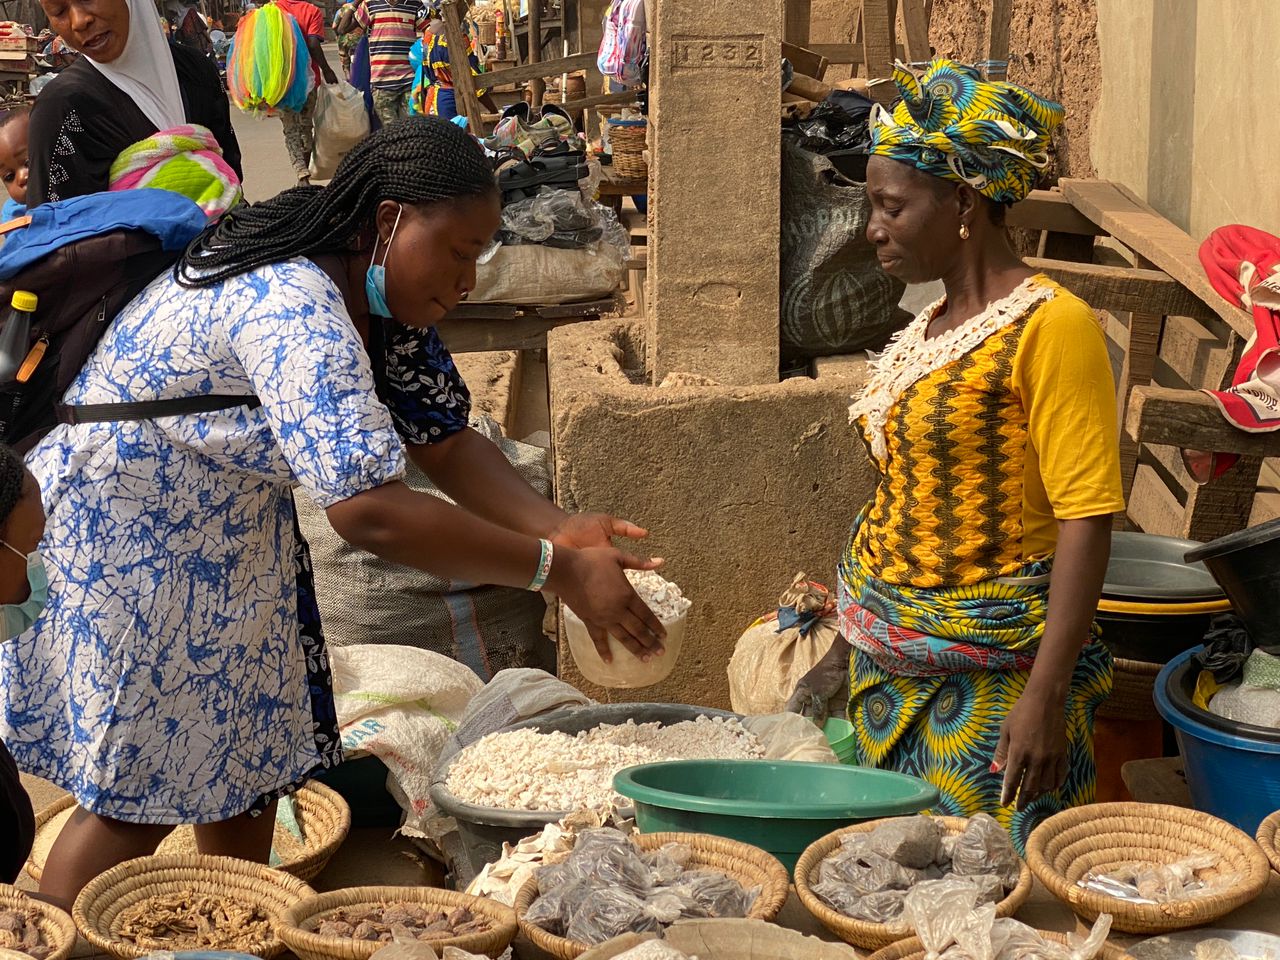 Conducting a market survey in Oyo state. Nigeria, 2022